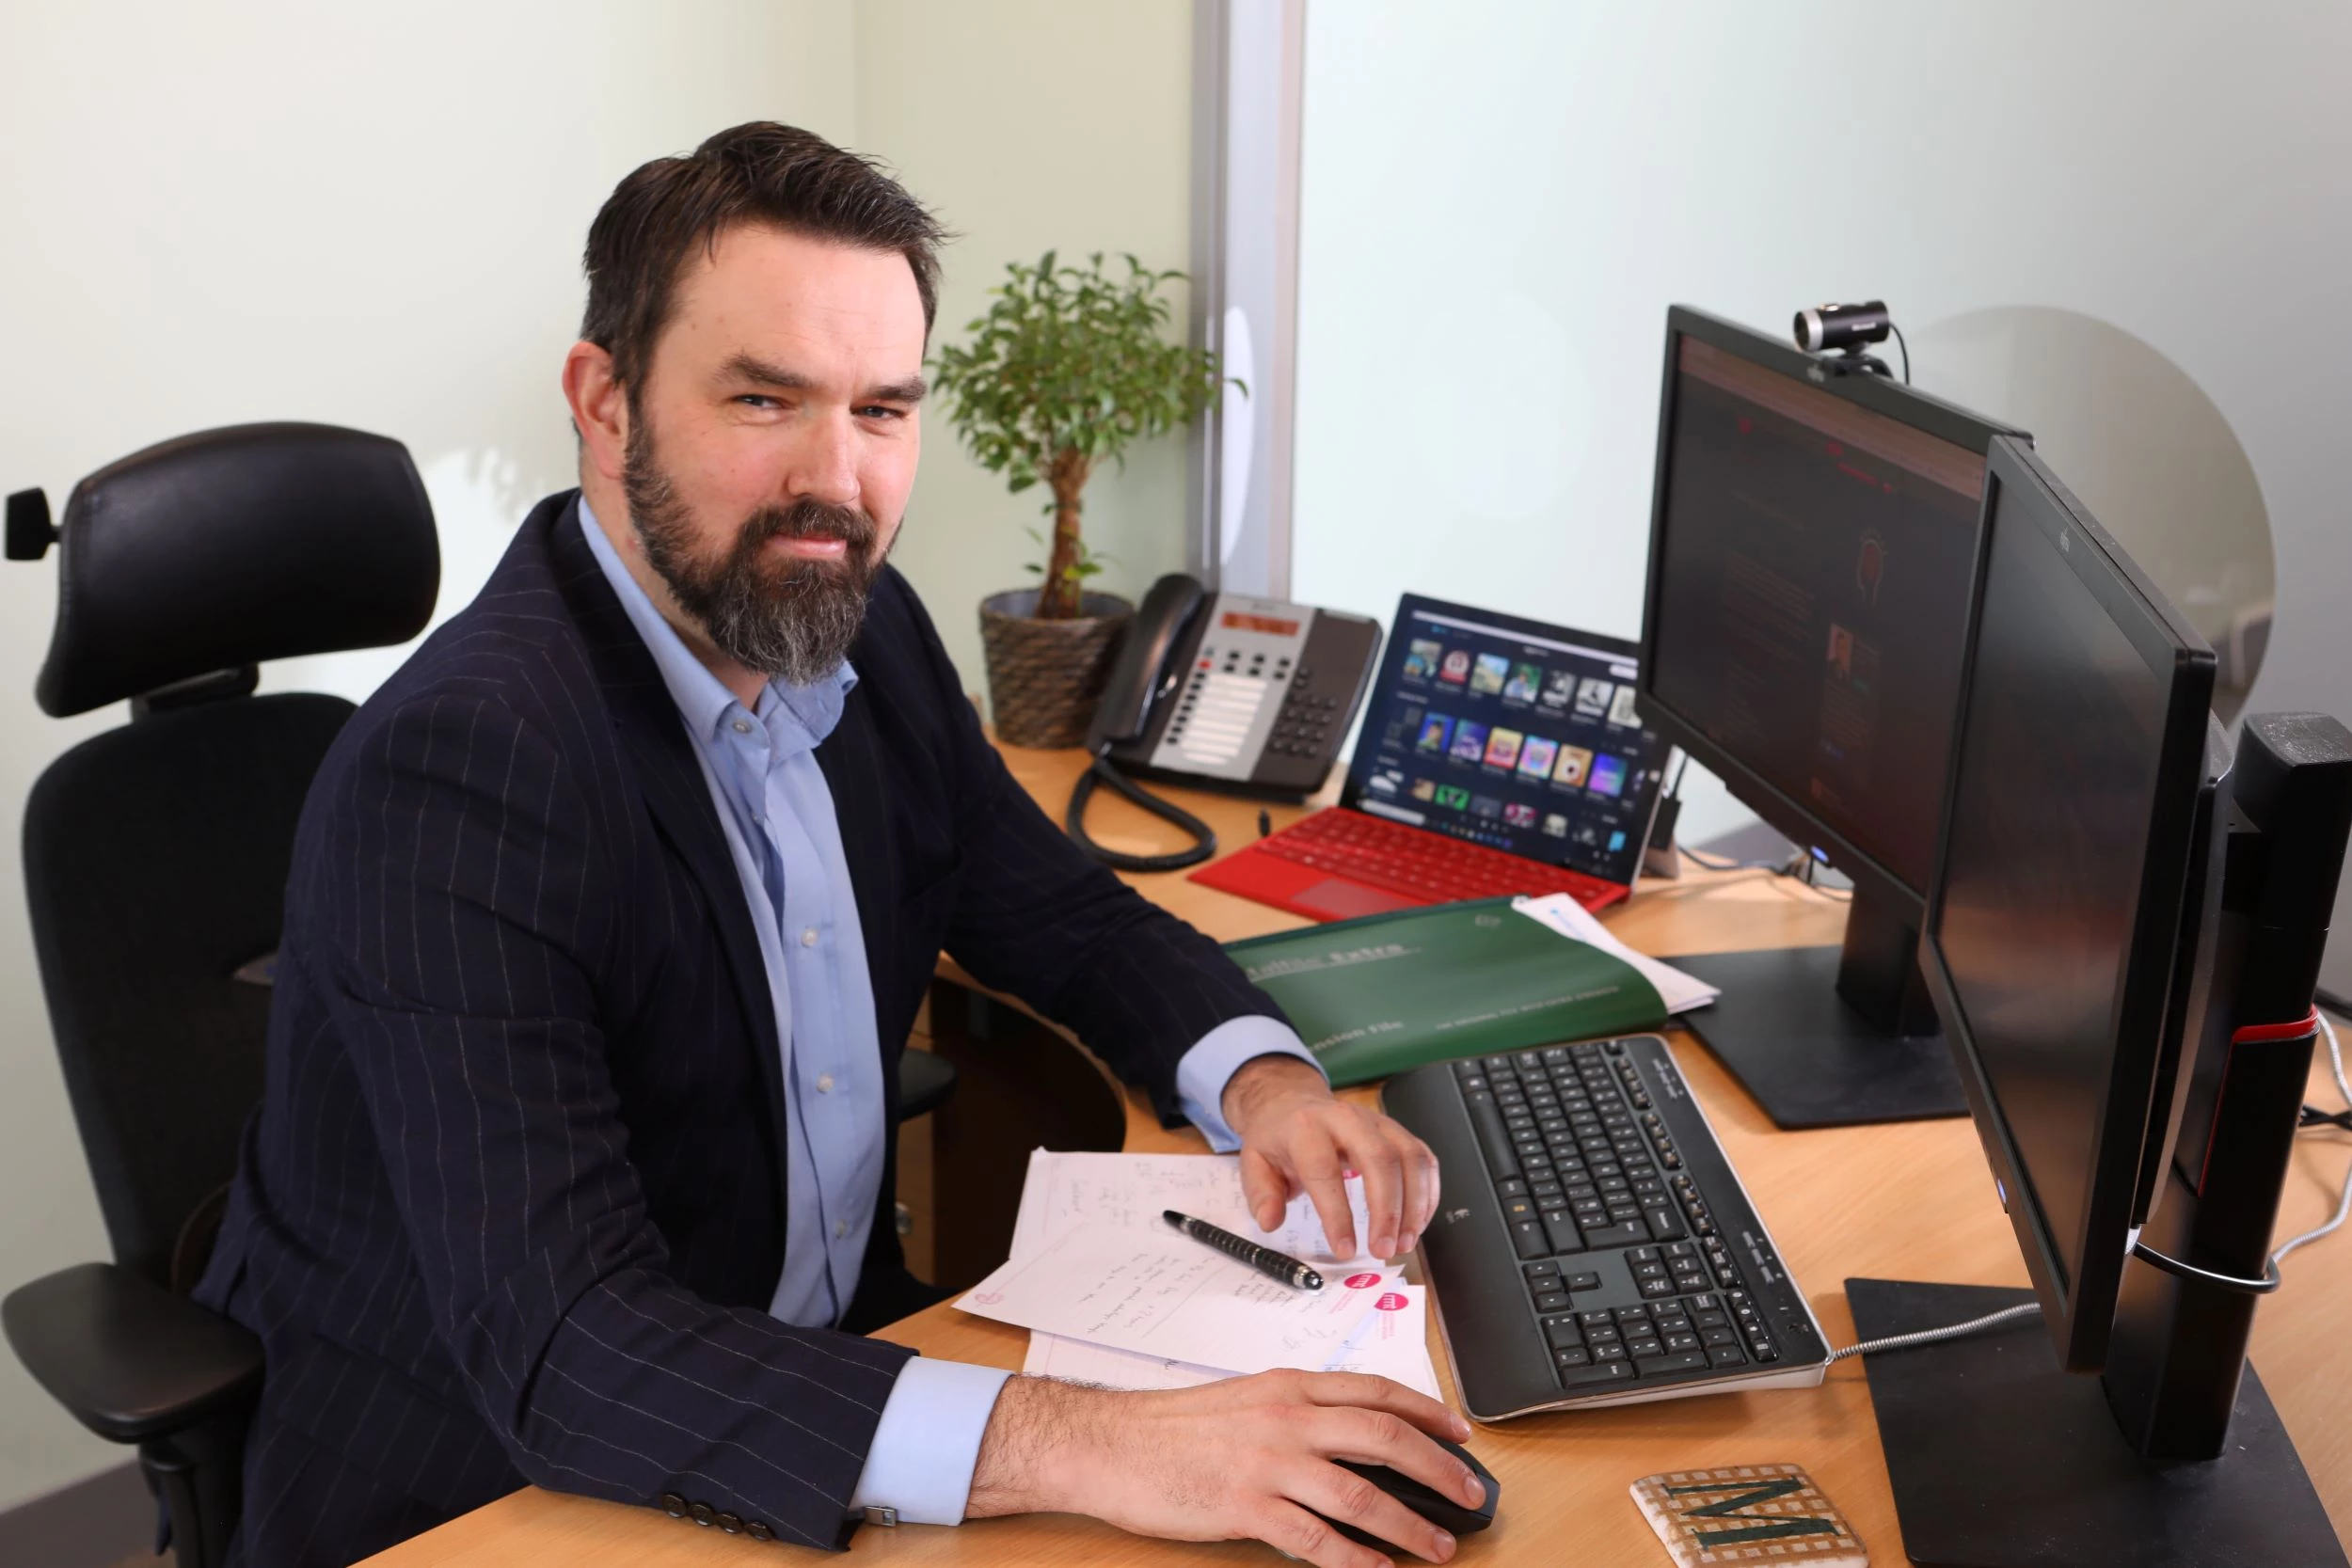 Michael Cantwell, head of corporate finance at RMT Accountants & Business Advisors